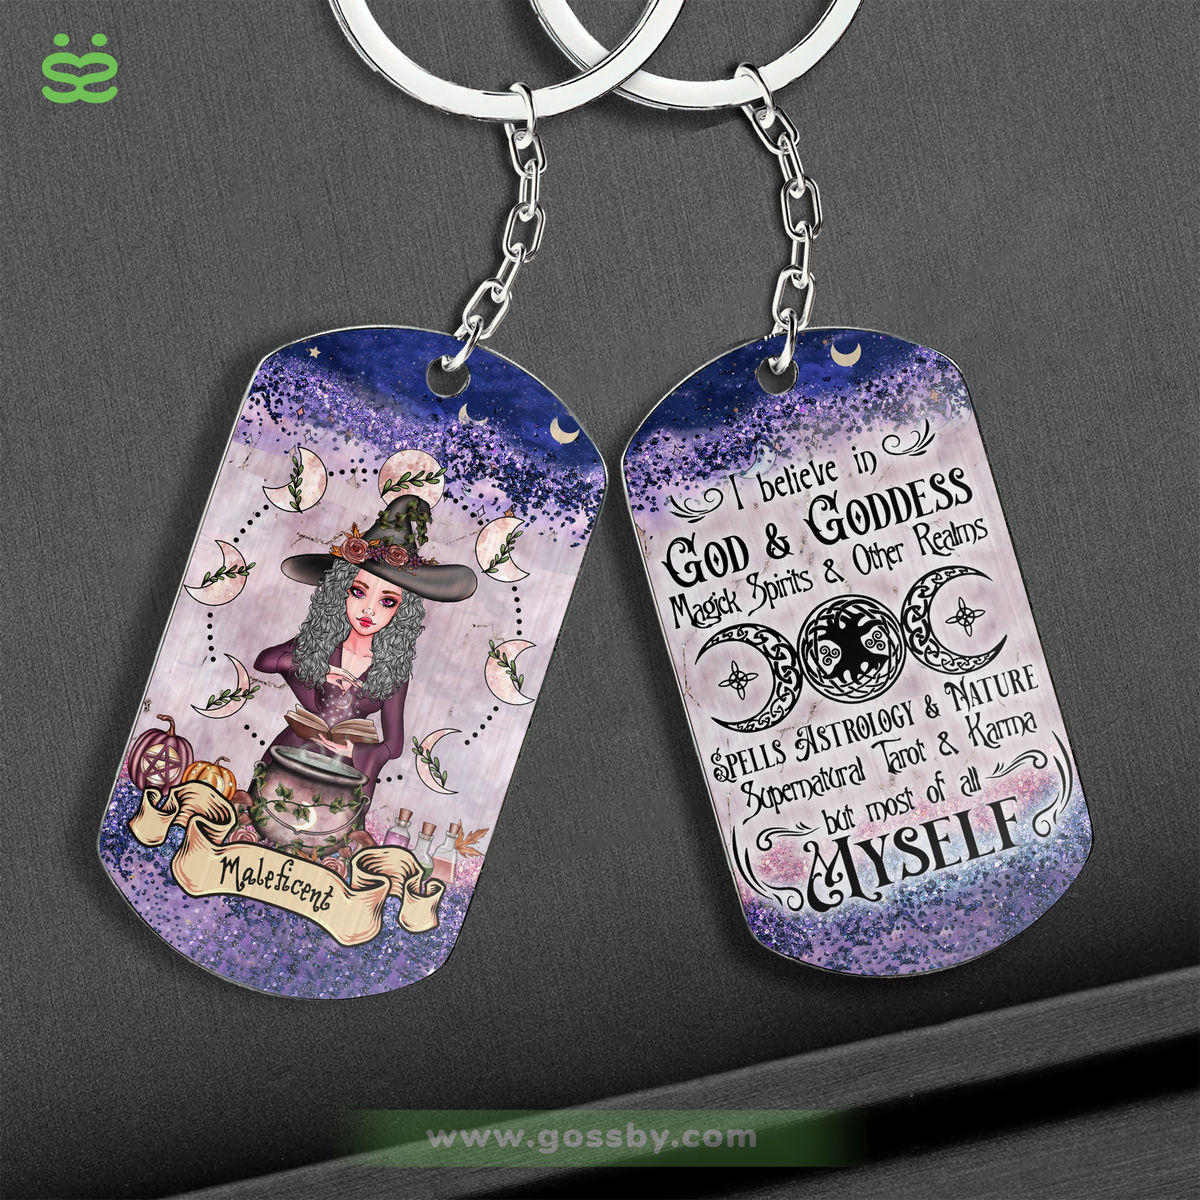 Personalized Keychain - Personalized - Personalized Keychain - Witch - I Believe In God And Goddess Magick Spirits And Other Realms Spells Astrology And Nature Supernatural Tarot And Karma But Most Of All Myself (6818)_1